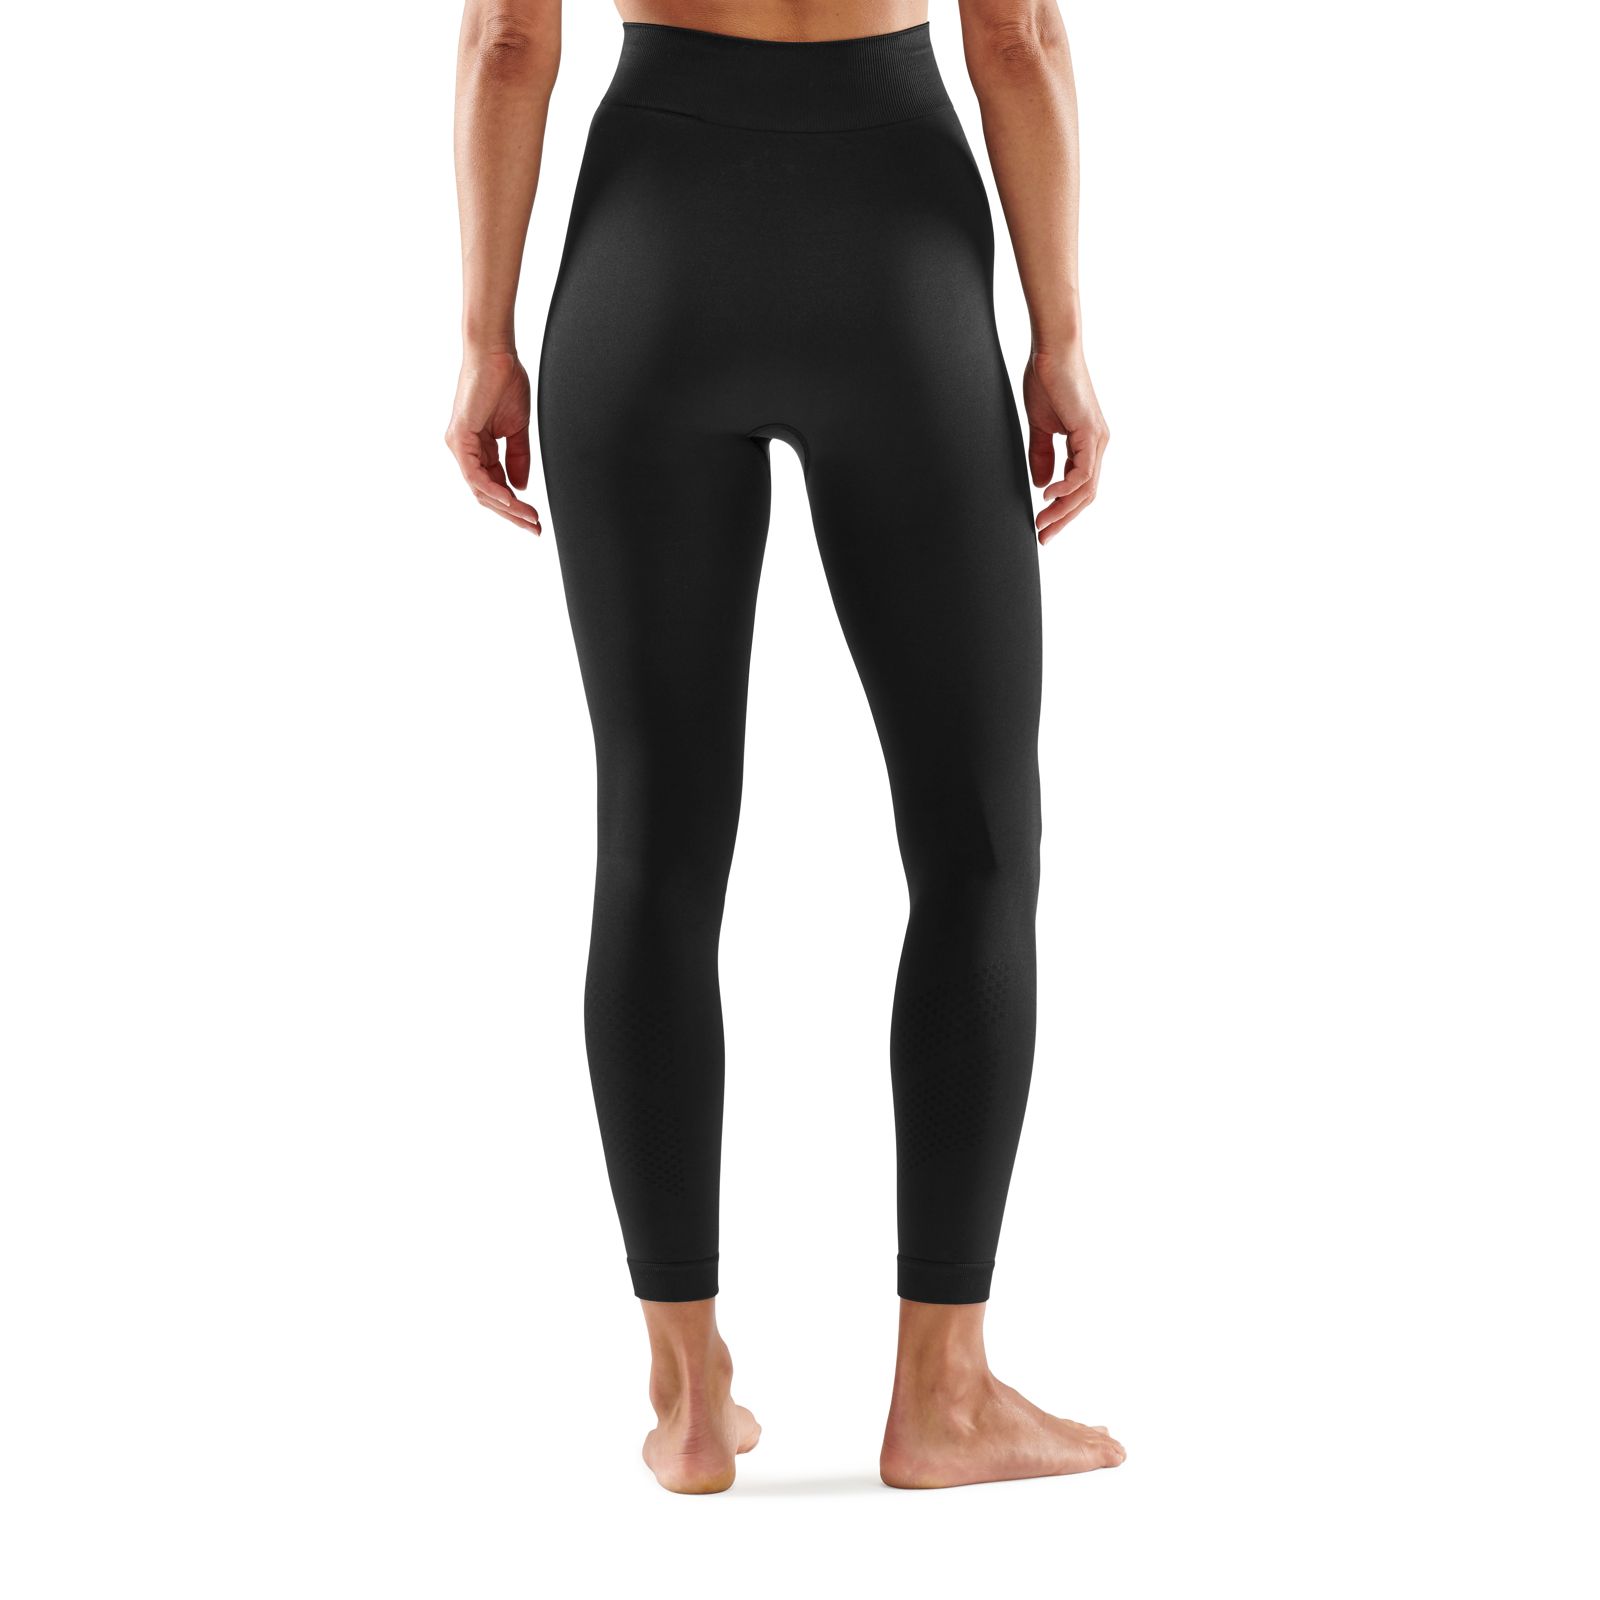 Skins Compression Long Tights, Women Series 3 Skyscraper - Black, 100%  Authentic, Women's Fashion, Activewear on Carousell